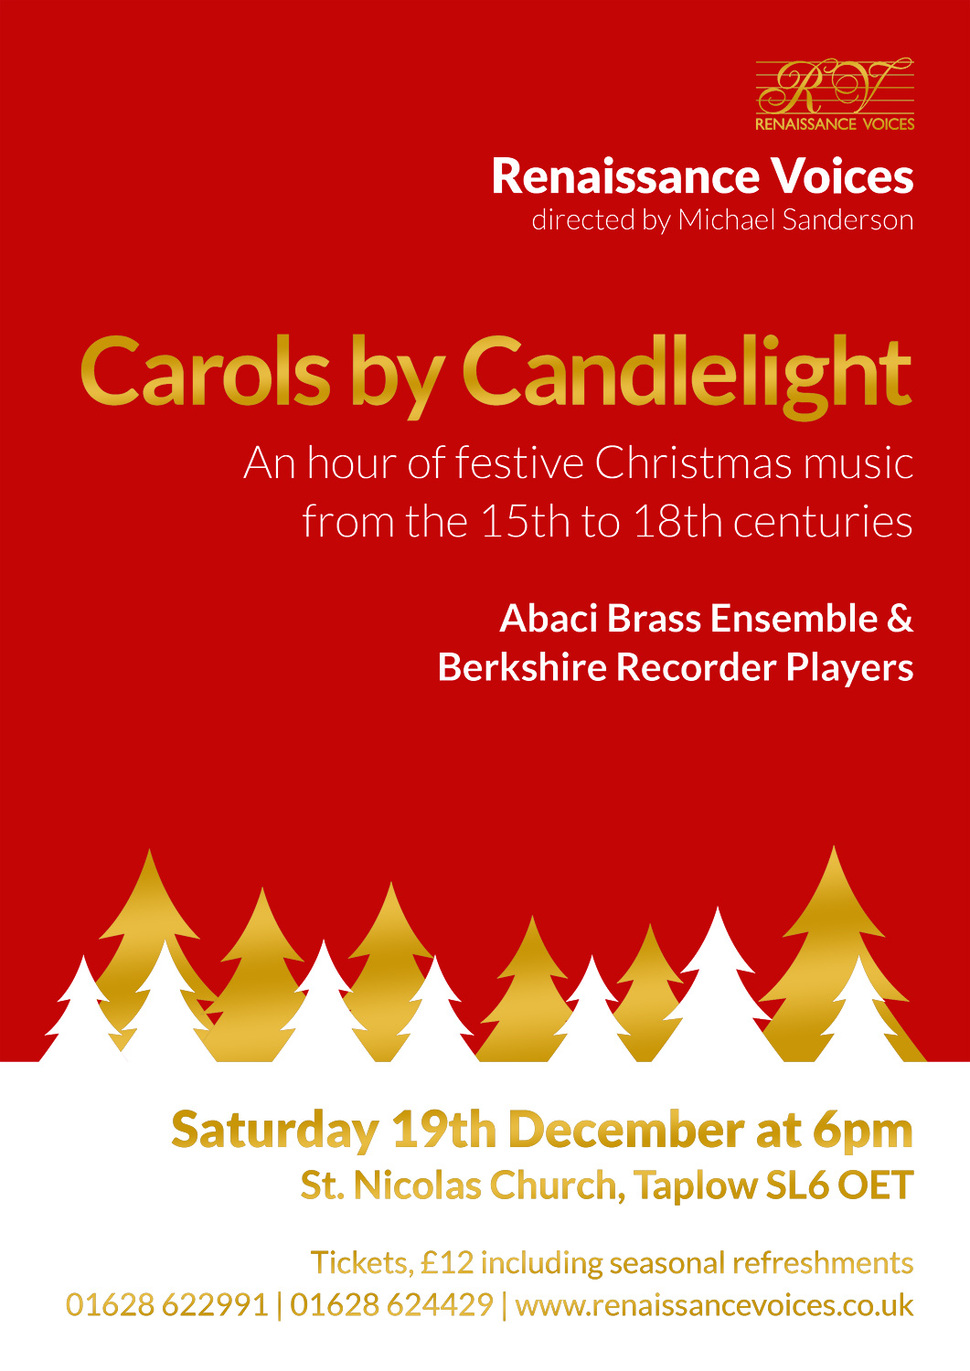 Flyer for the concert on Saturday, 19th December 2015